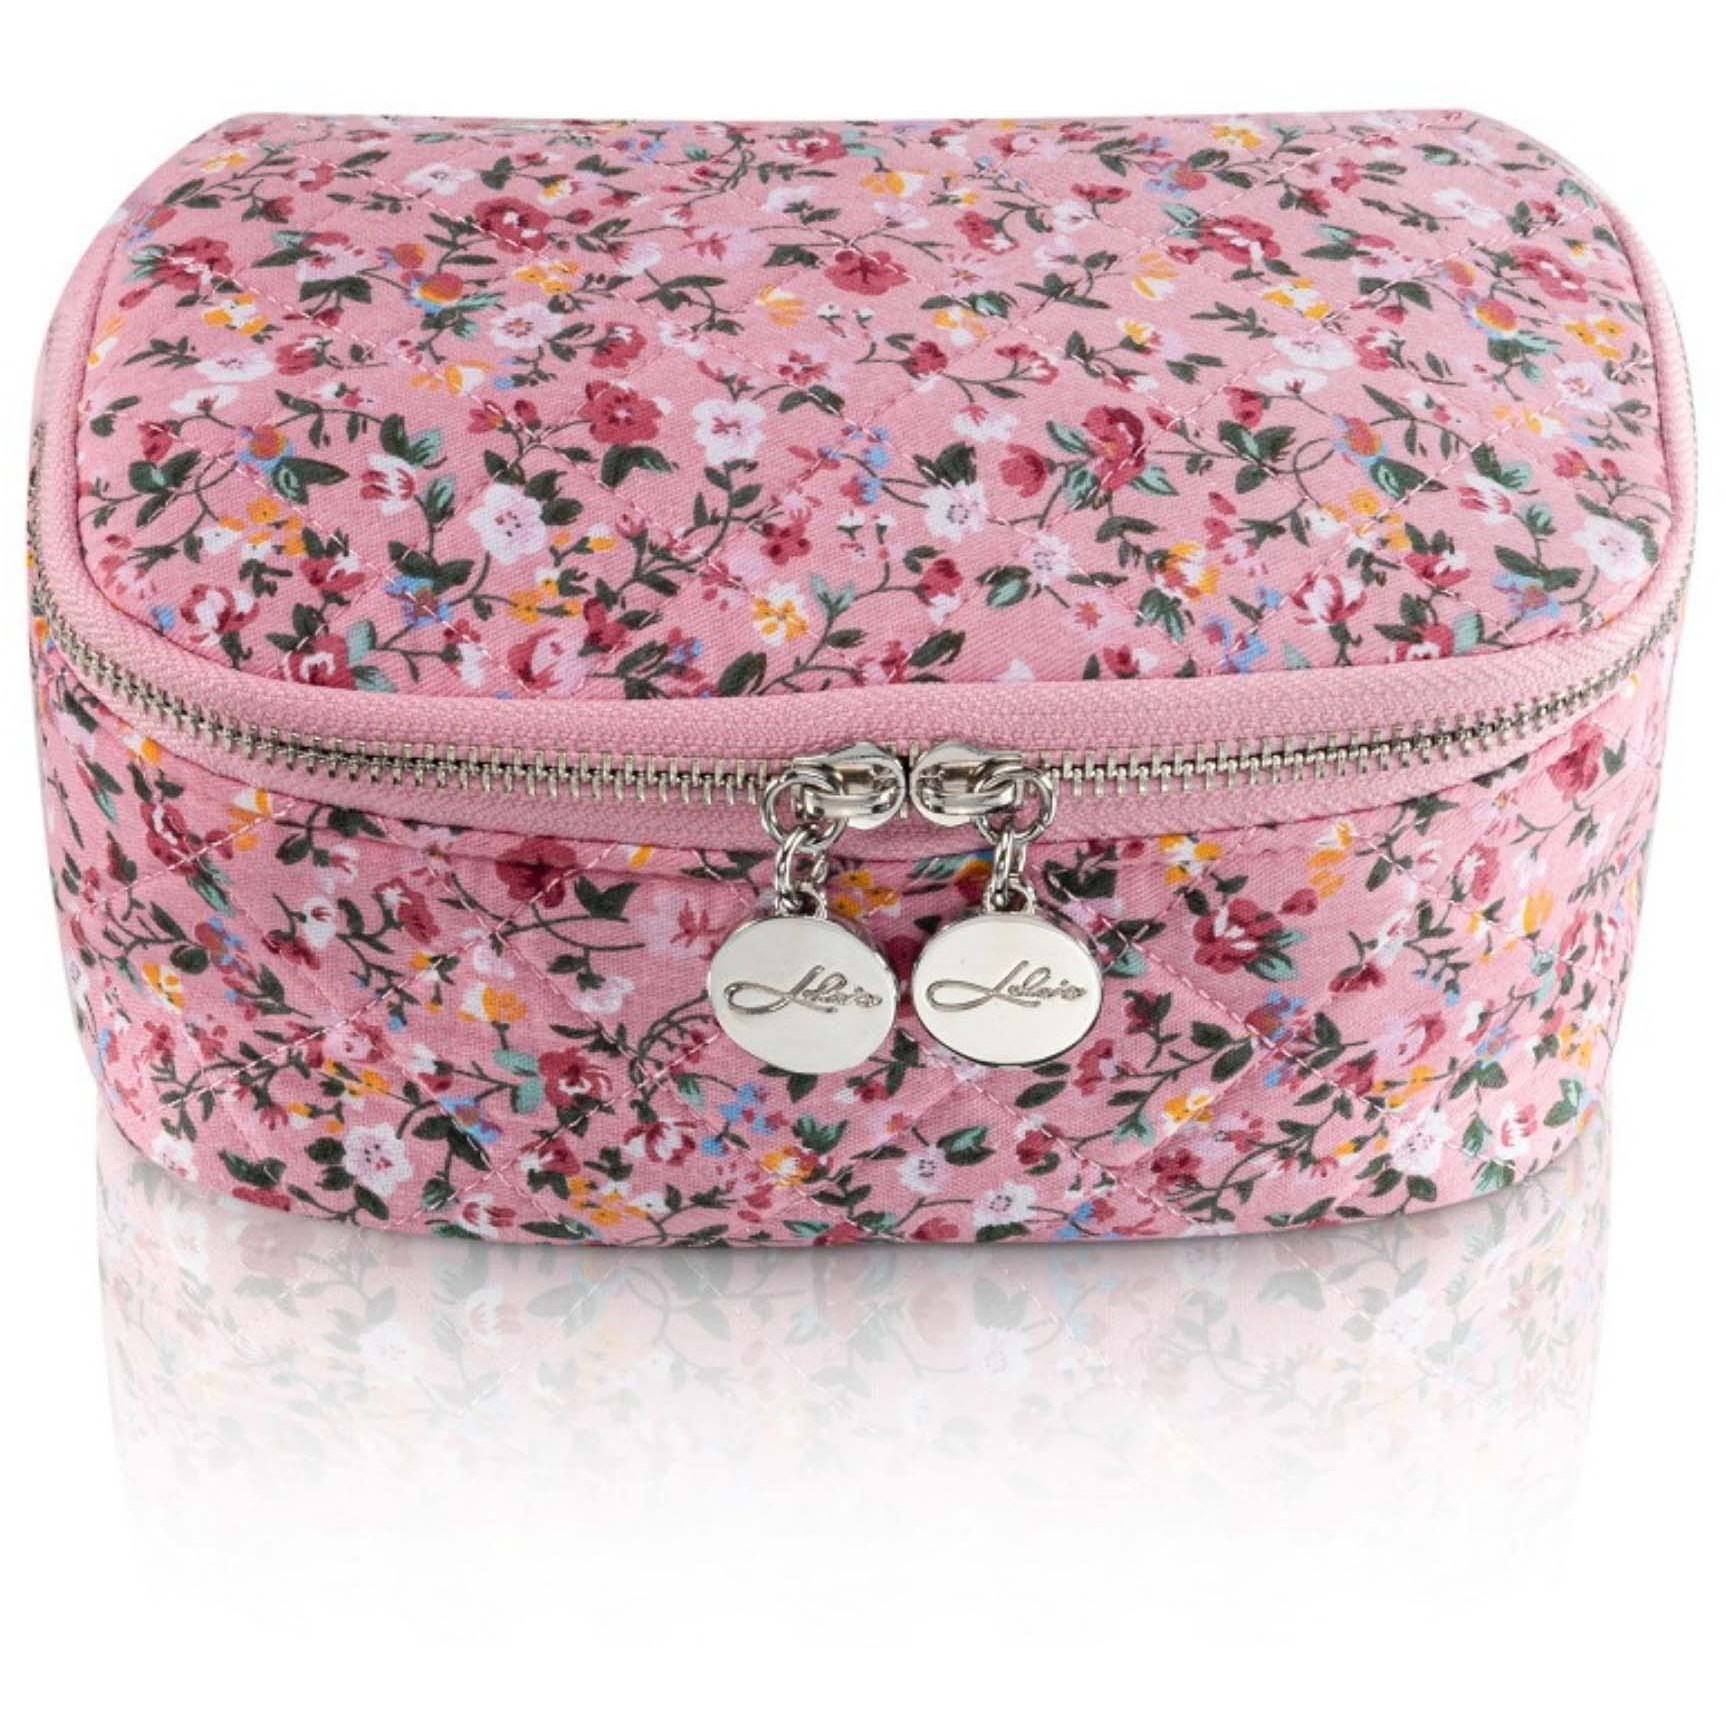 LULUS ACCESSORIES Cosmetic Case Floral Rose